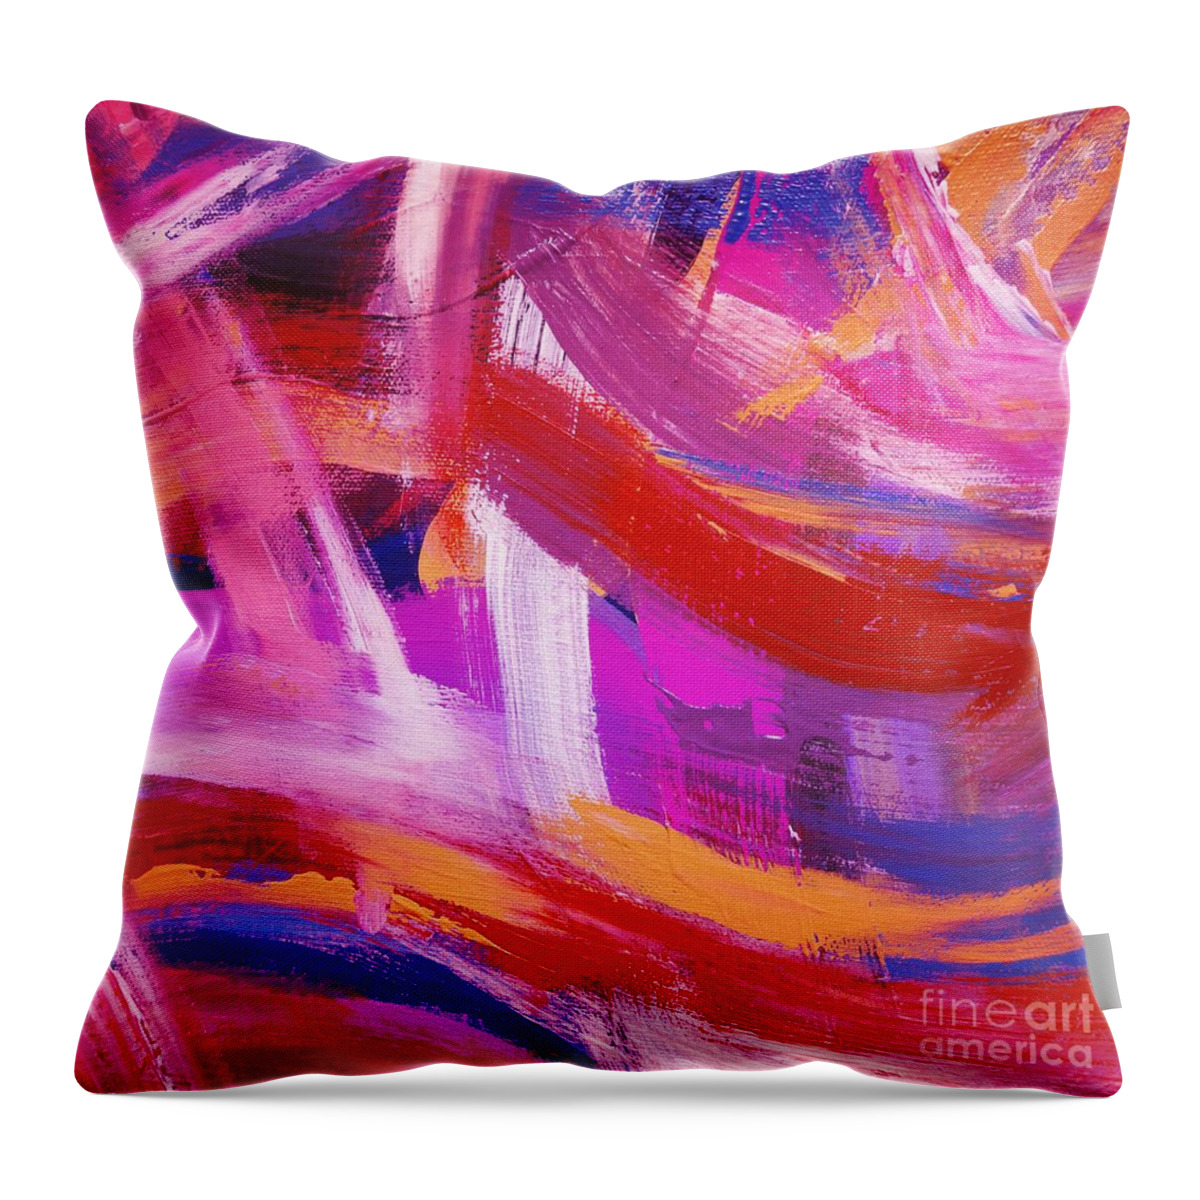 Colorful Throw Pillow featuring the digital art Moratovum - Artistic Colorful Abstract Watercolor Painting Digital Art by Sambel Pedes